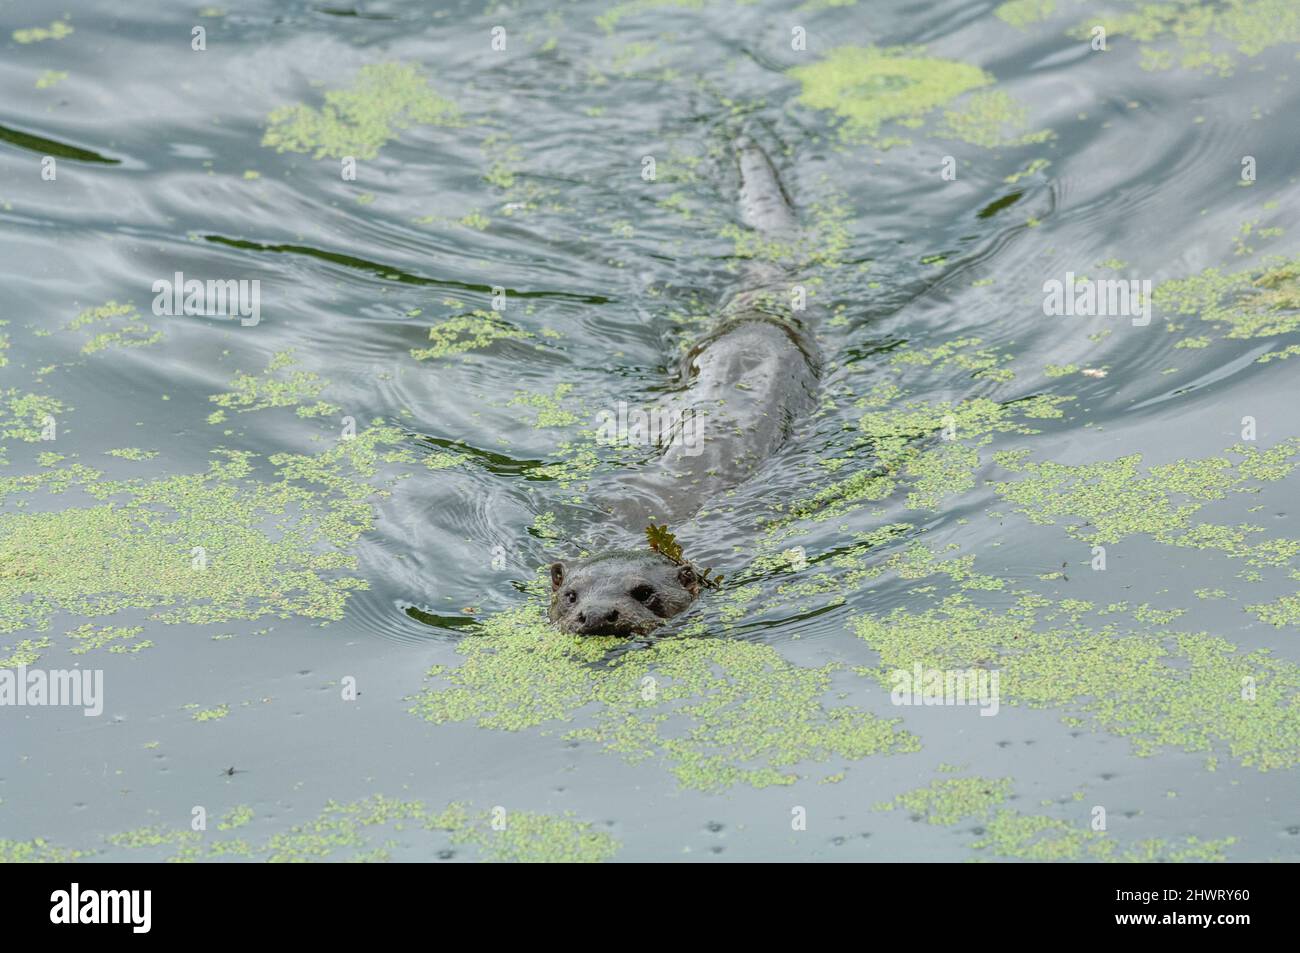 Otter swimming in algae filled lake. Ammonia gas from nearby intensive dairy farm causes excess algal growth. Stock Photo